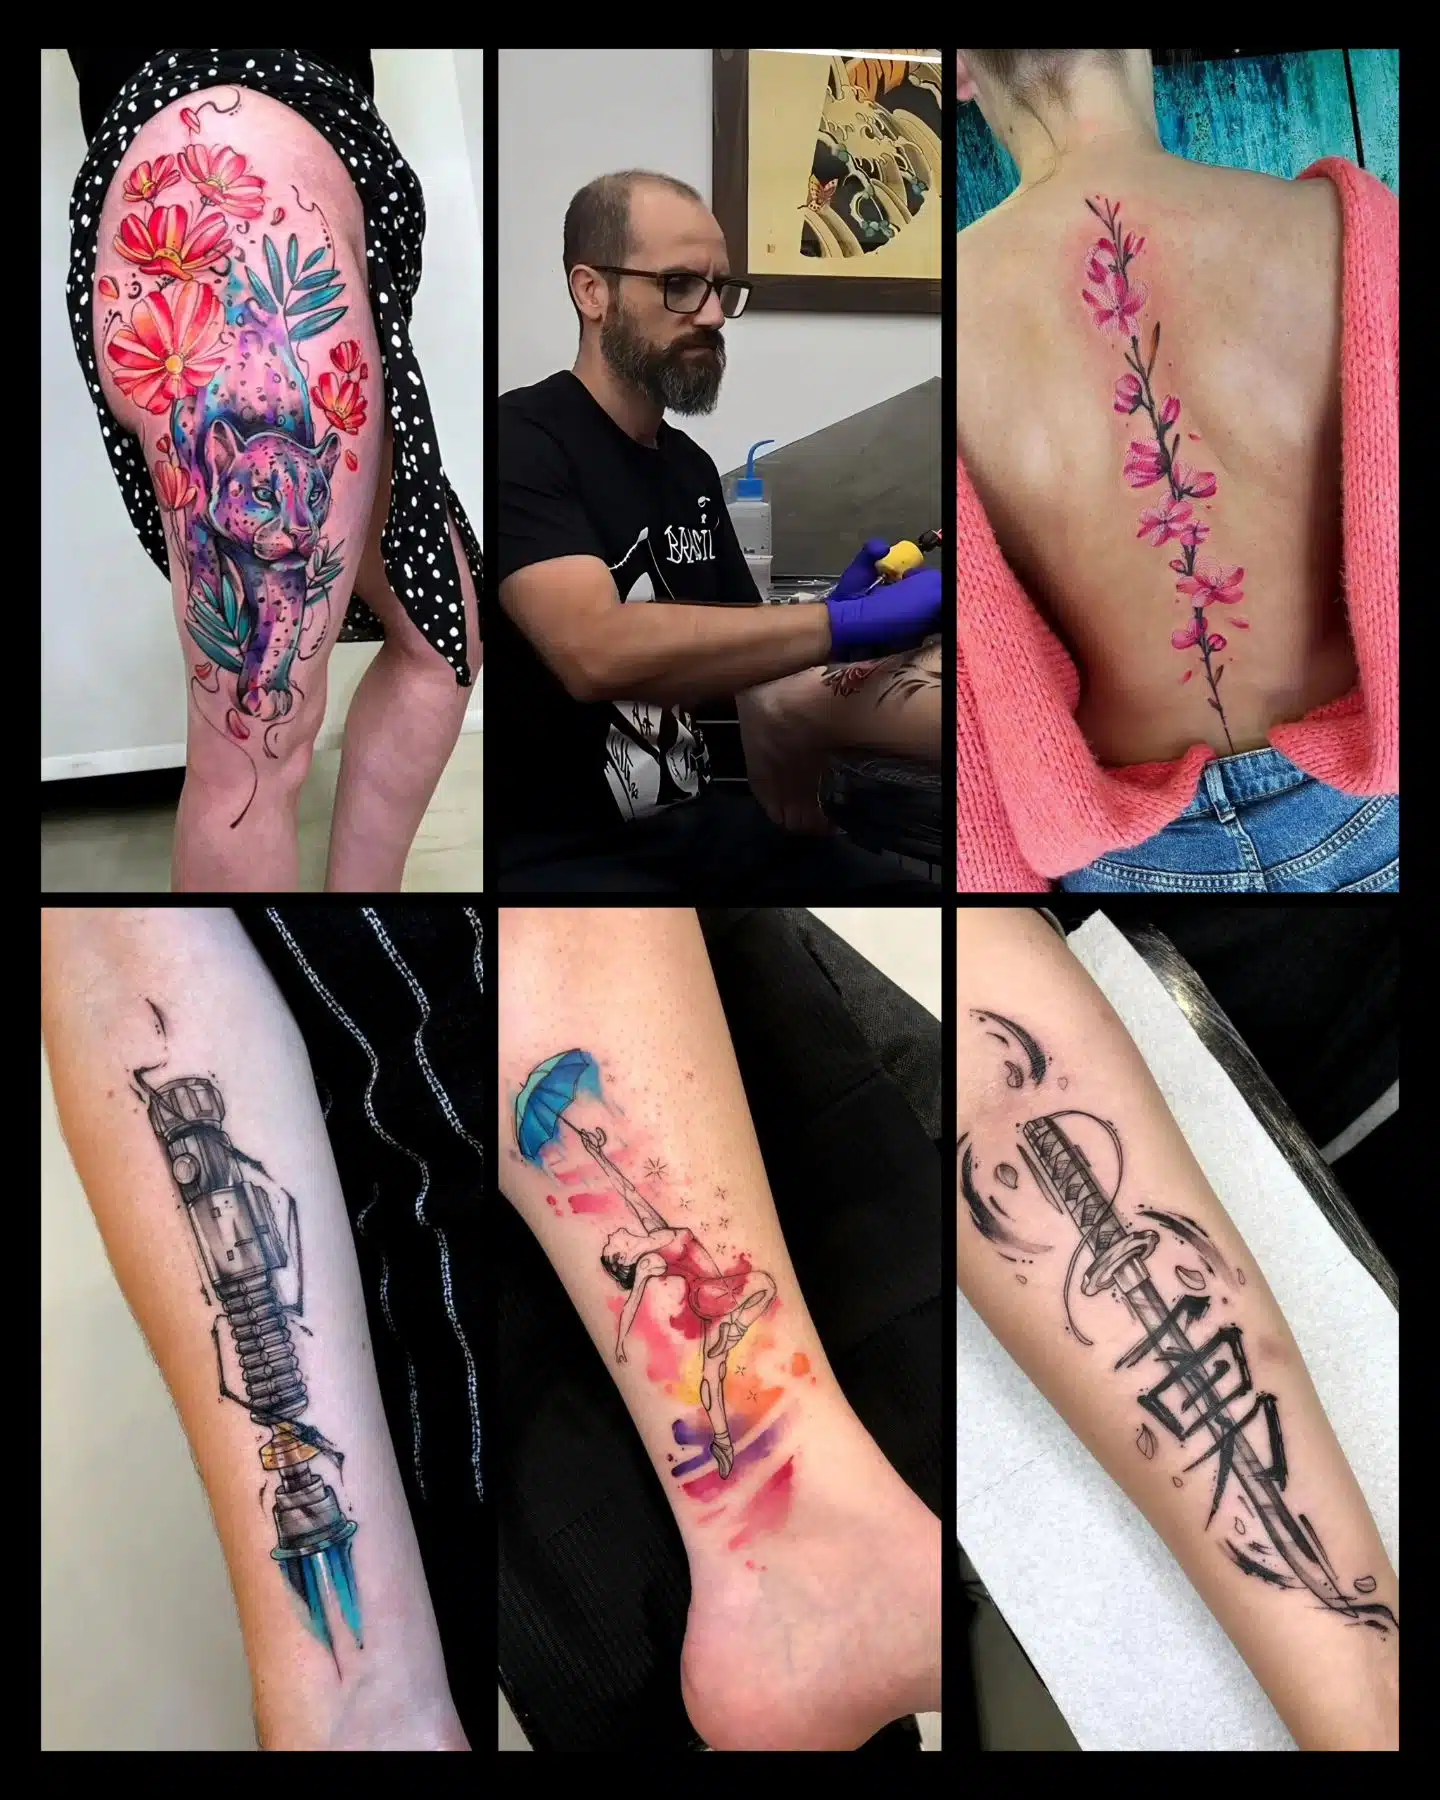 Heeeere's Jonny! Our next guest artist is jonny.ink who will be working with us from the 12th to 16th February. Bookings are open now, please fill out the enquiry form on the homepage of our website watermelon.tattoo to make an appointment with this amazing artist!

       